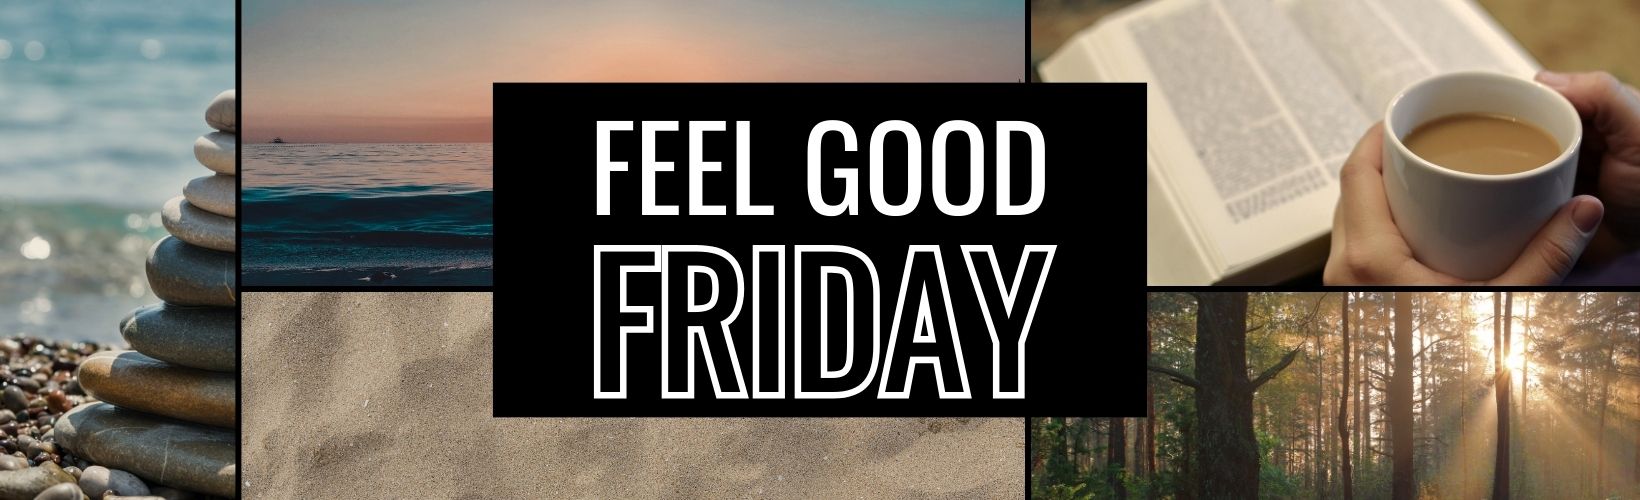 Feel Good Friday: How to Find Hope and Purpose in Life